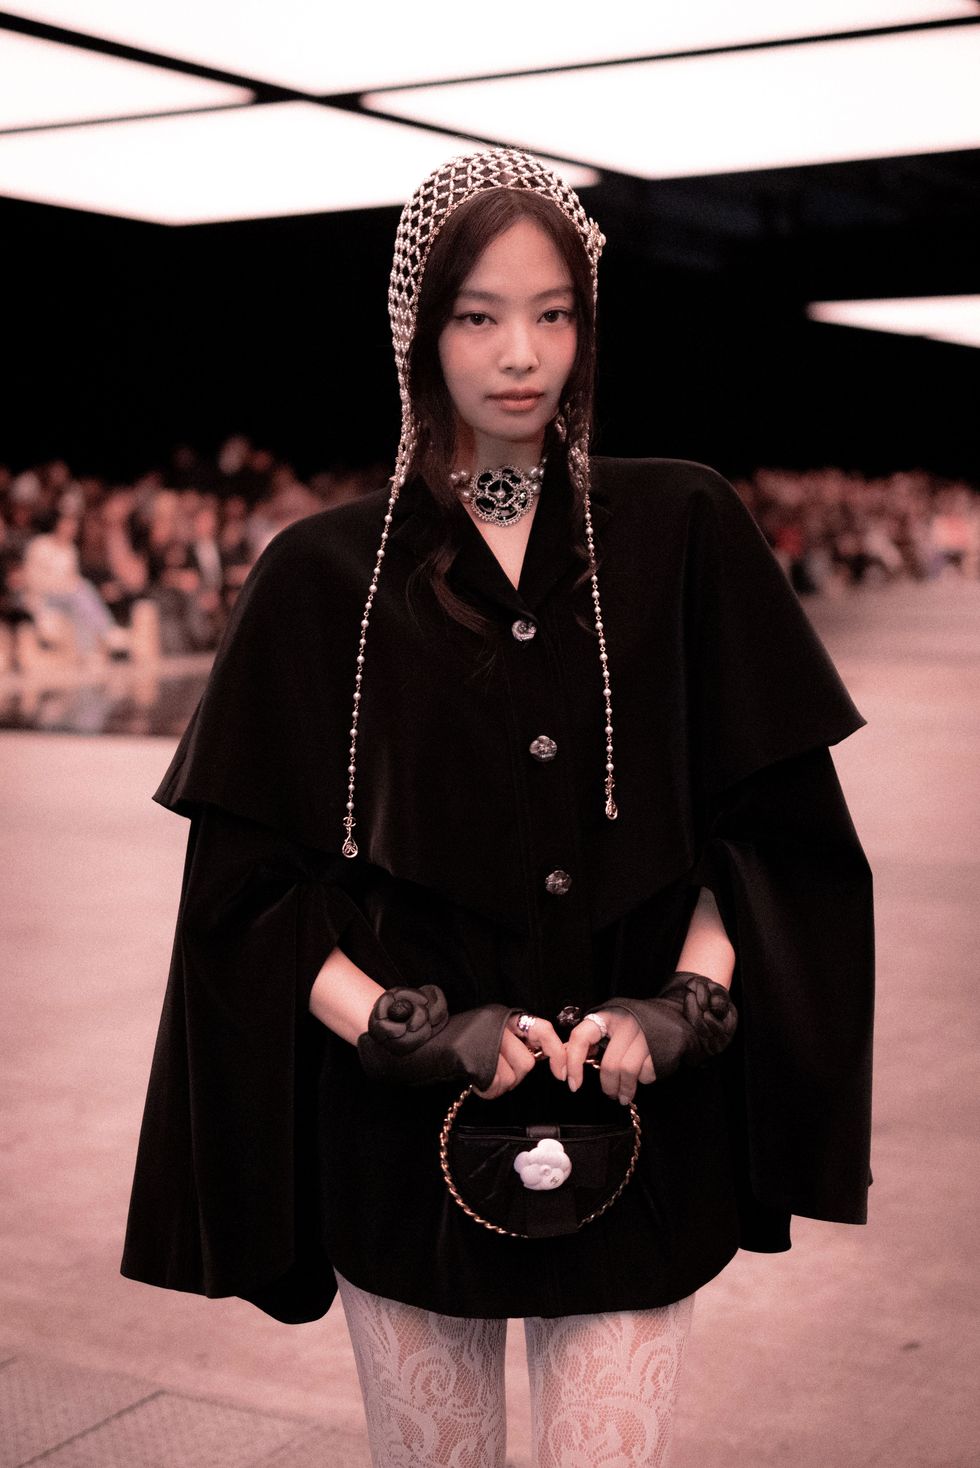 jennie at the chanel show